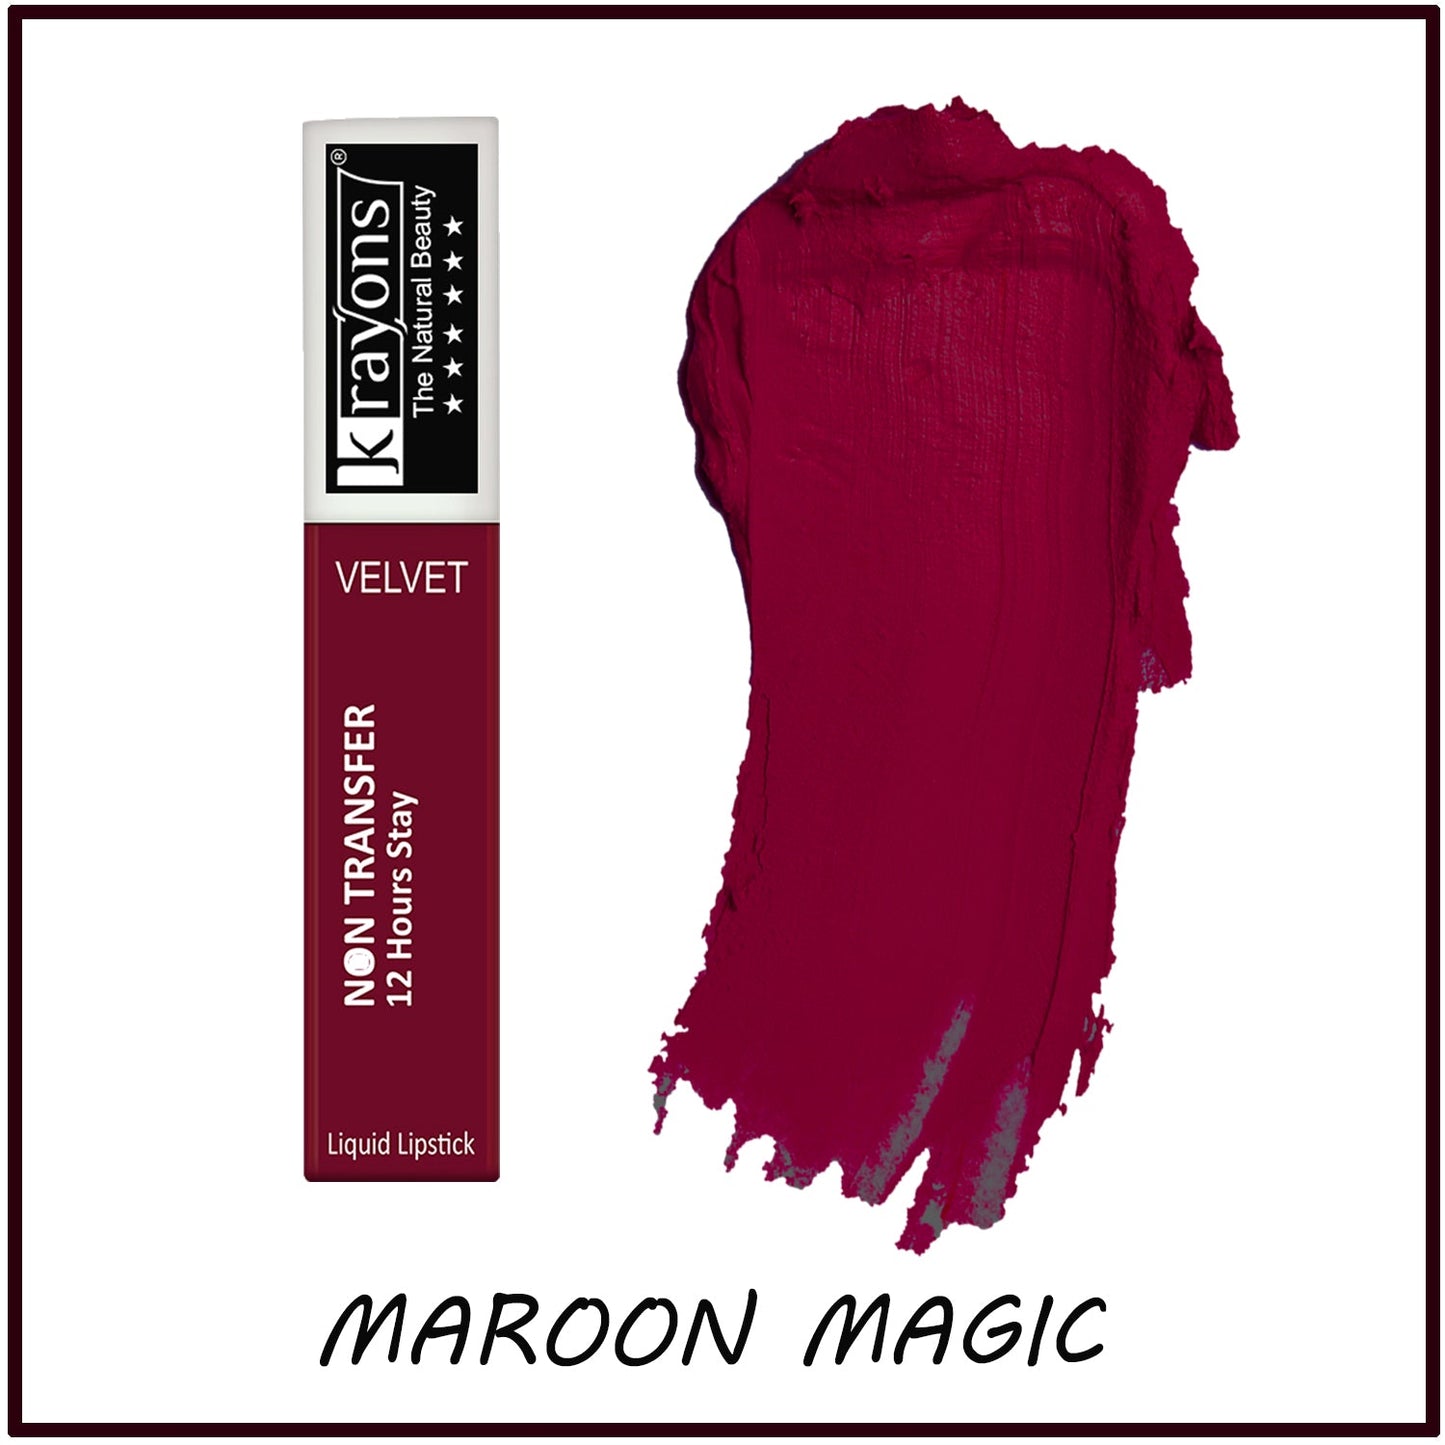 Krayons Power Stay Nontransfer 12hrs Stay Matte Liquid Lipstick, Mask Proof, 4ml Each, Combo, Pack of 3 (Maroon Magic, Red Rush, Burnt Orange)